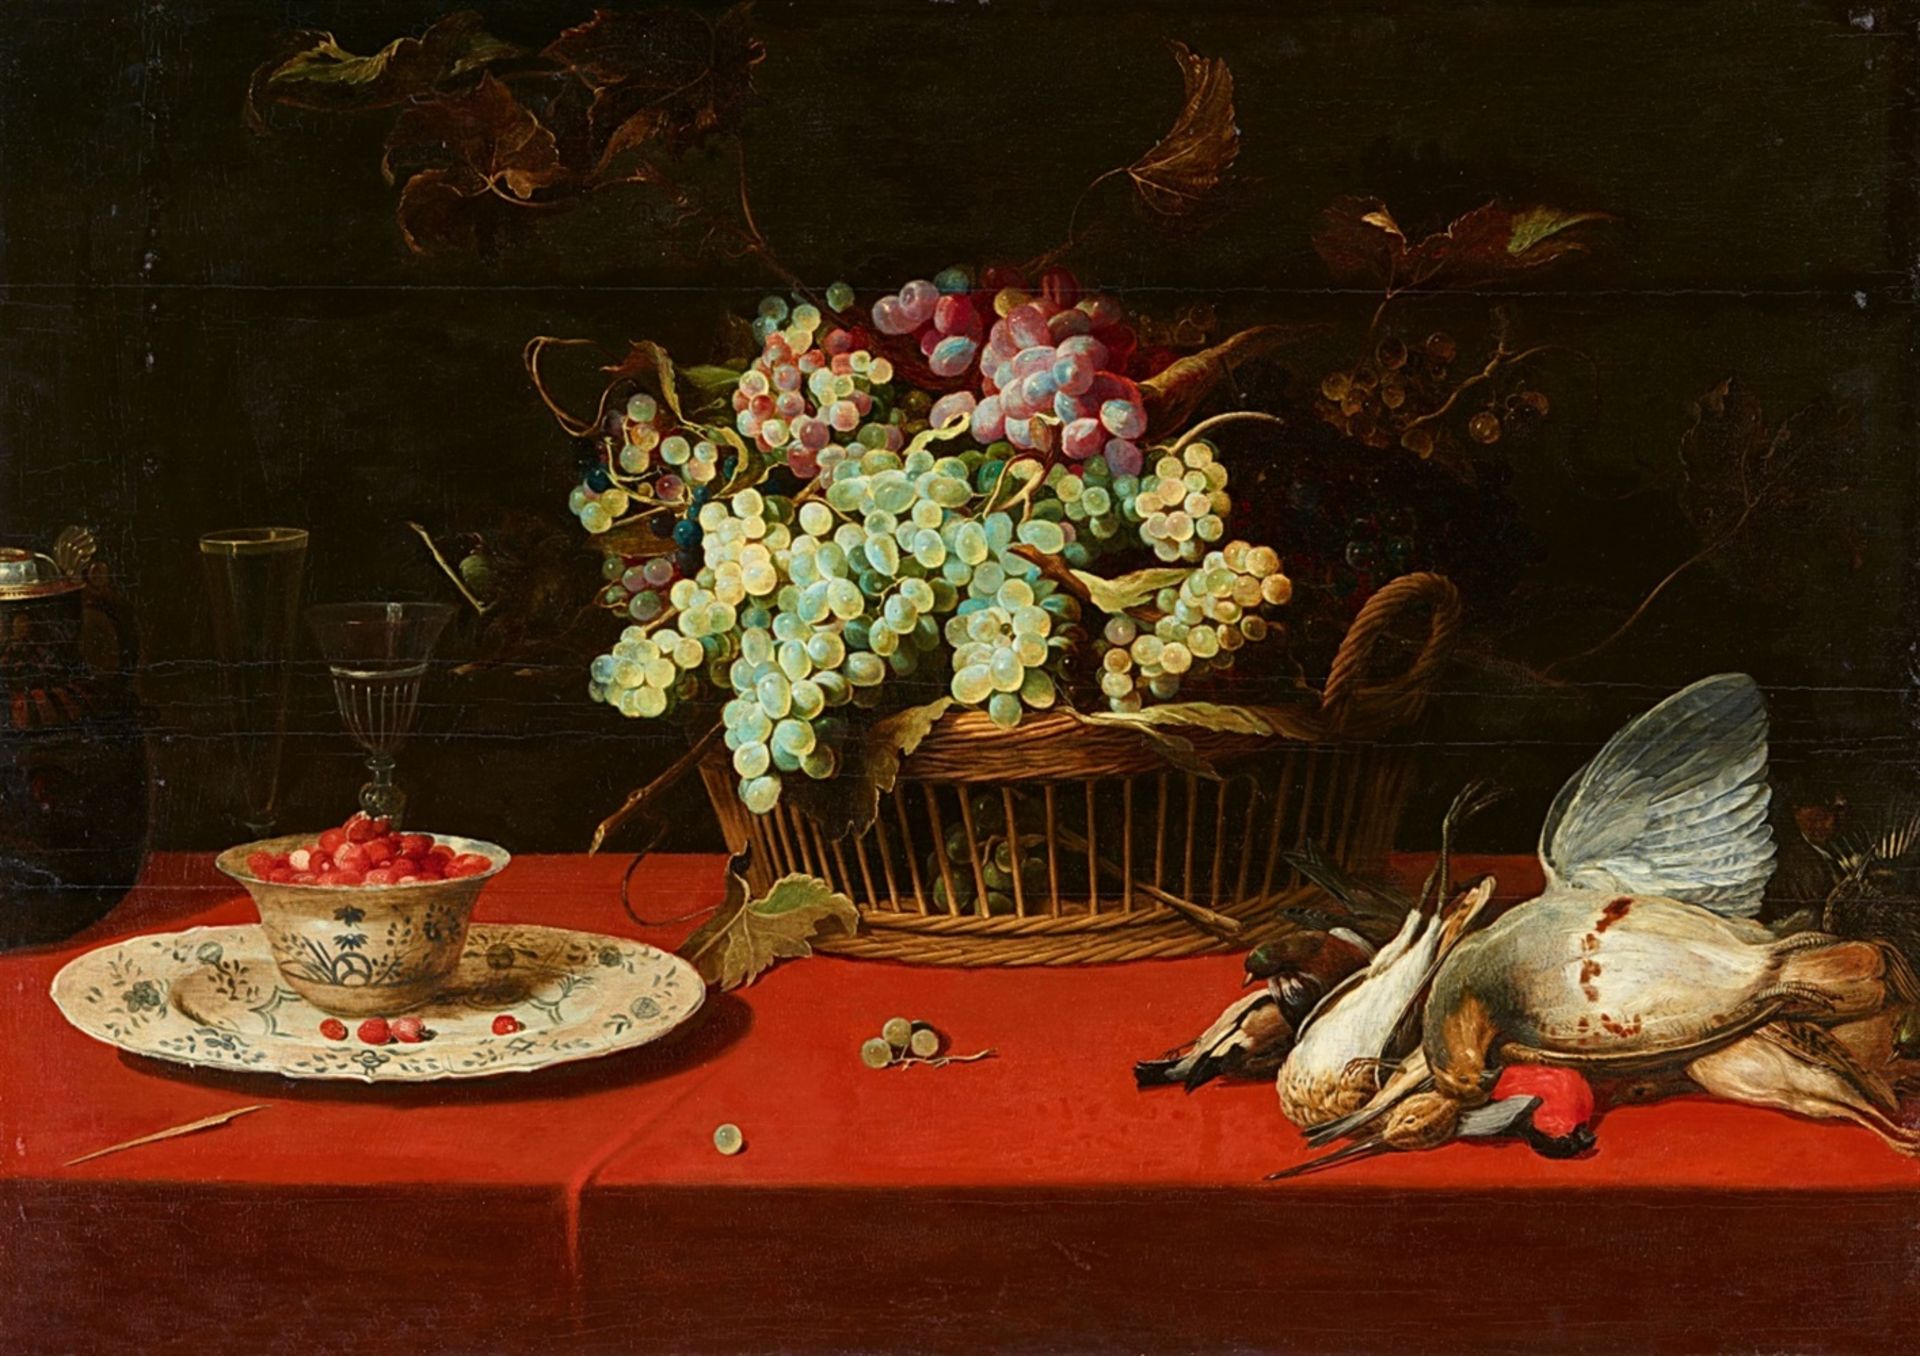 Frans SnydersStill Life with Grapes in a Basket, a Dish of Strawberries, and Game BirdsOil on